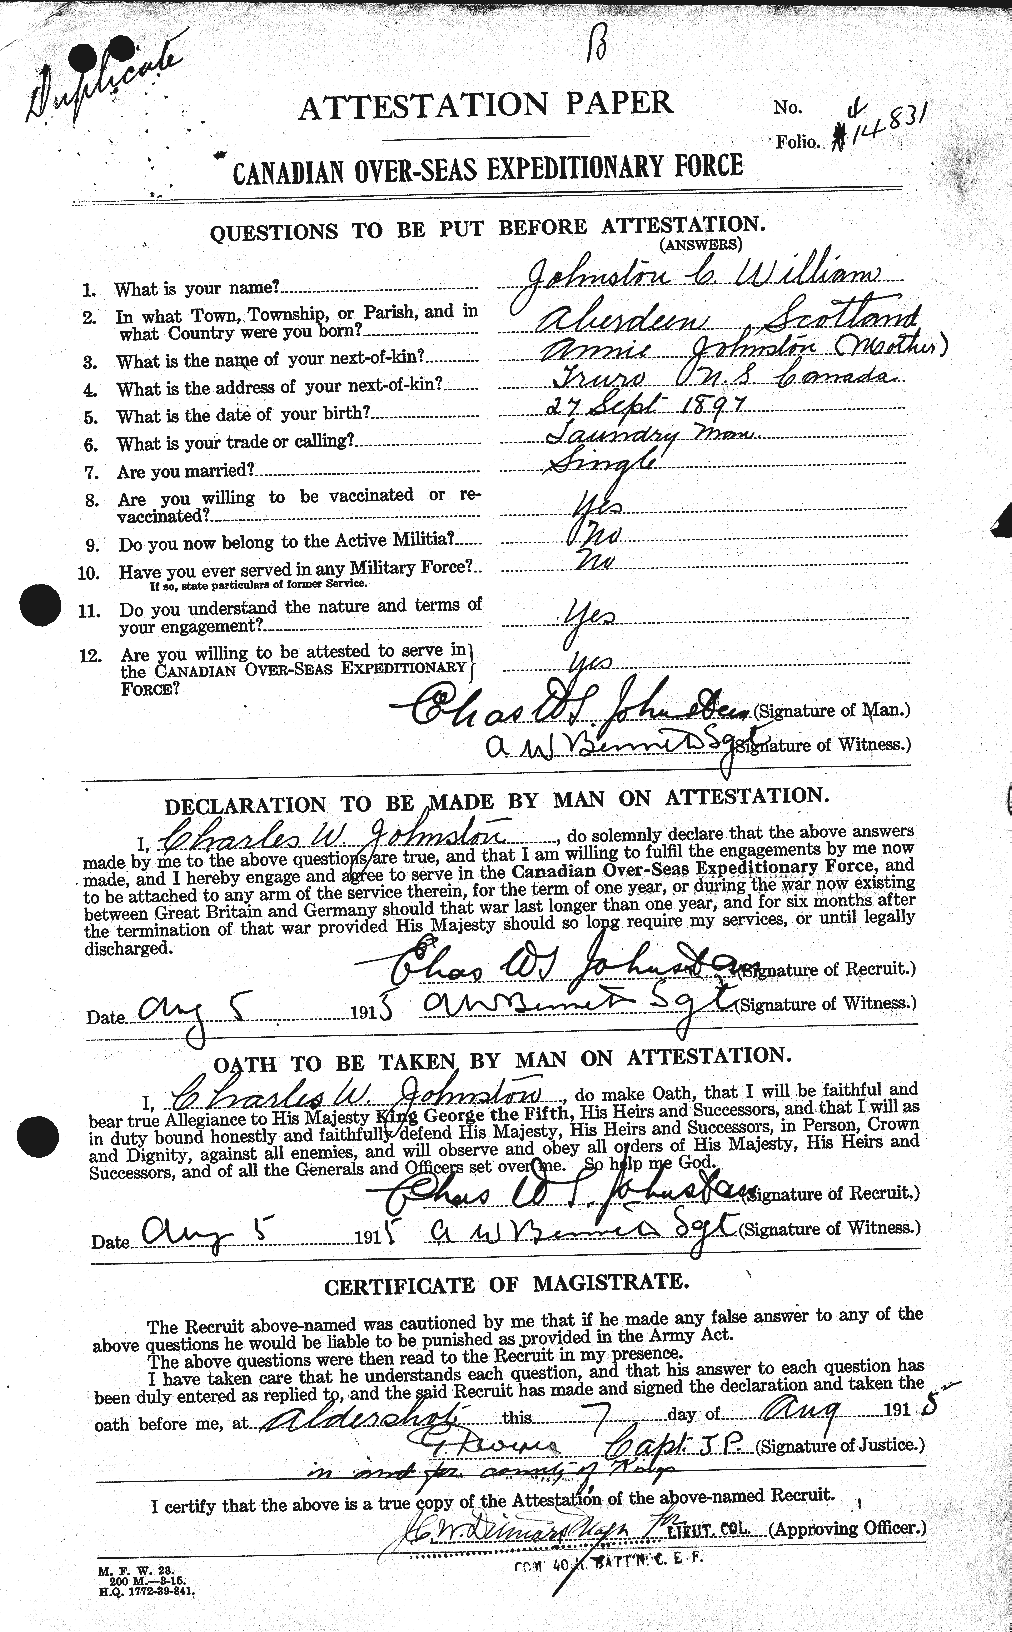 Personnel Records of the First World War - CEF 423123a